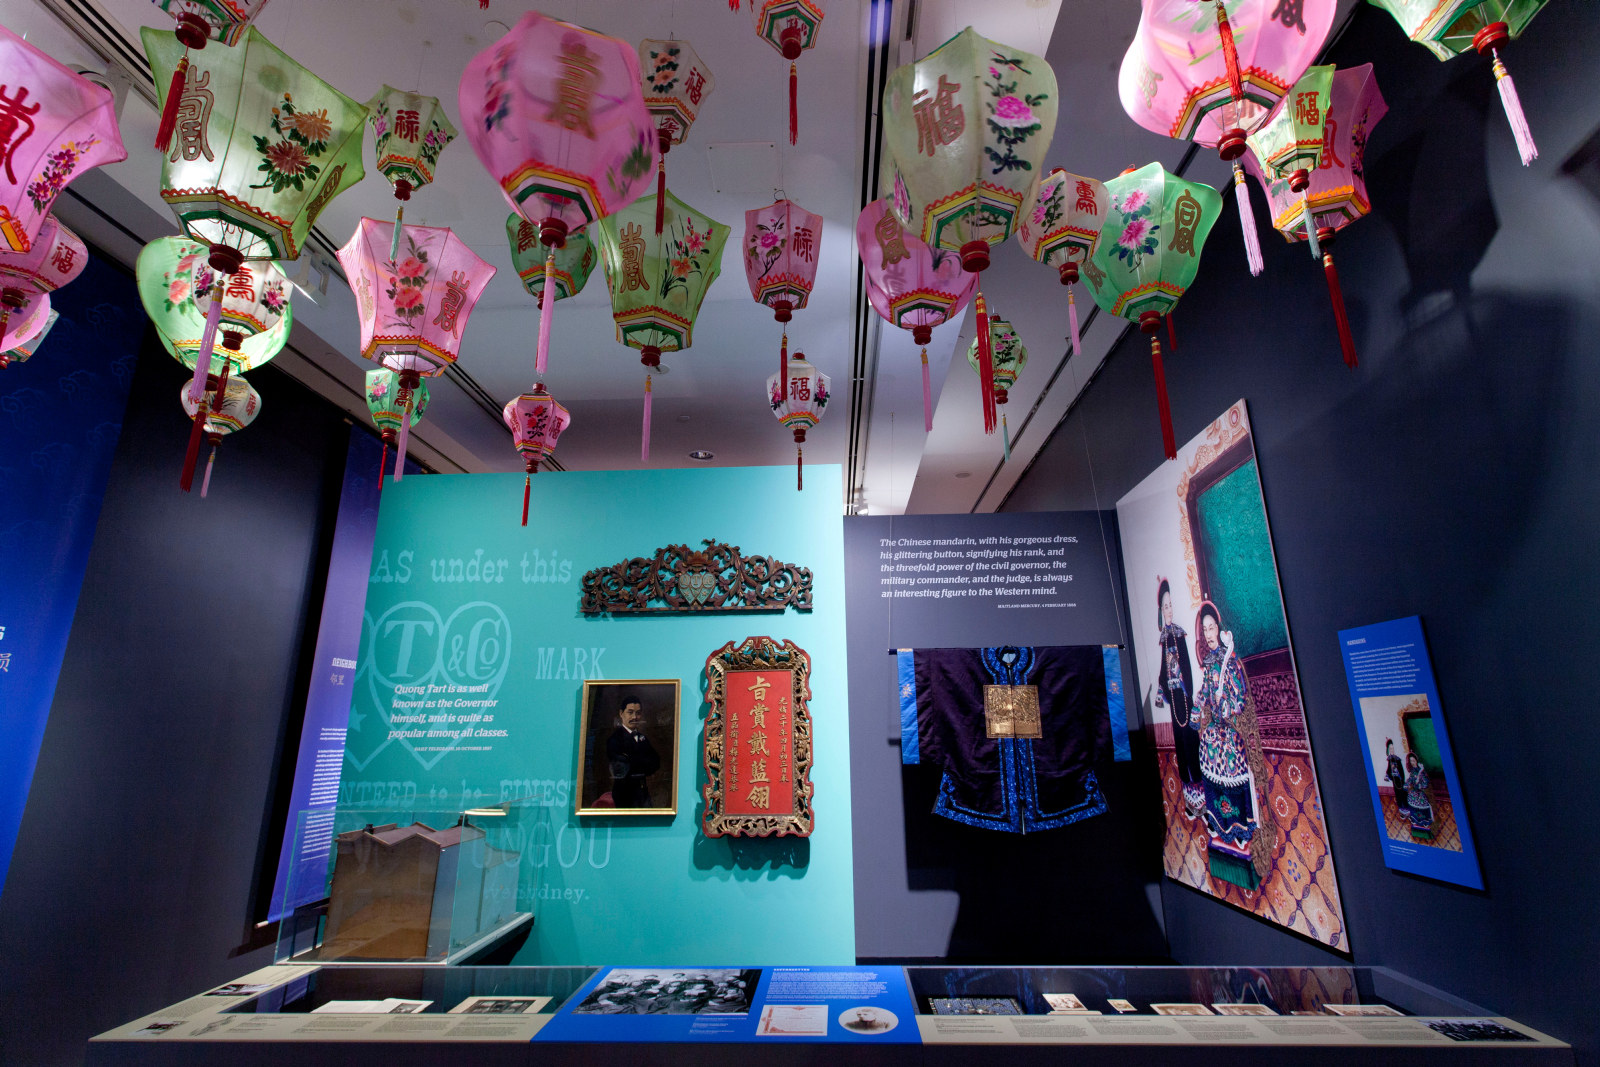 Exhibition view featuring objects in showcases and colourful Shanghai lanterns overhead